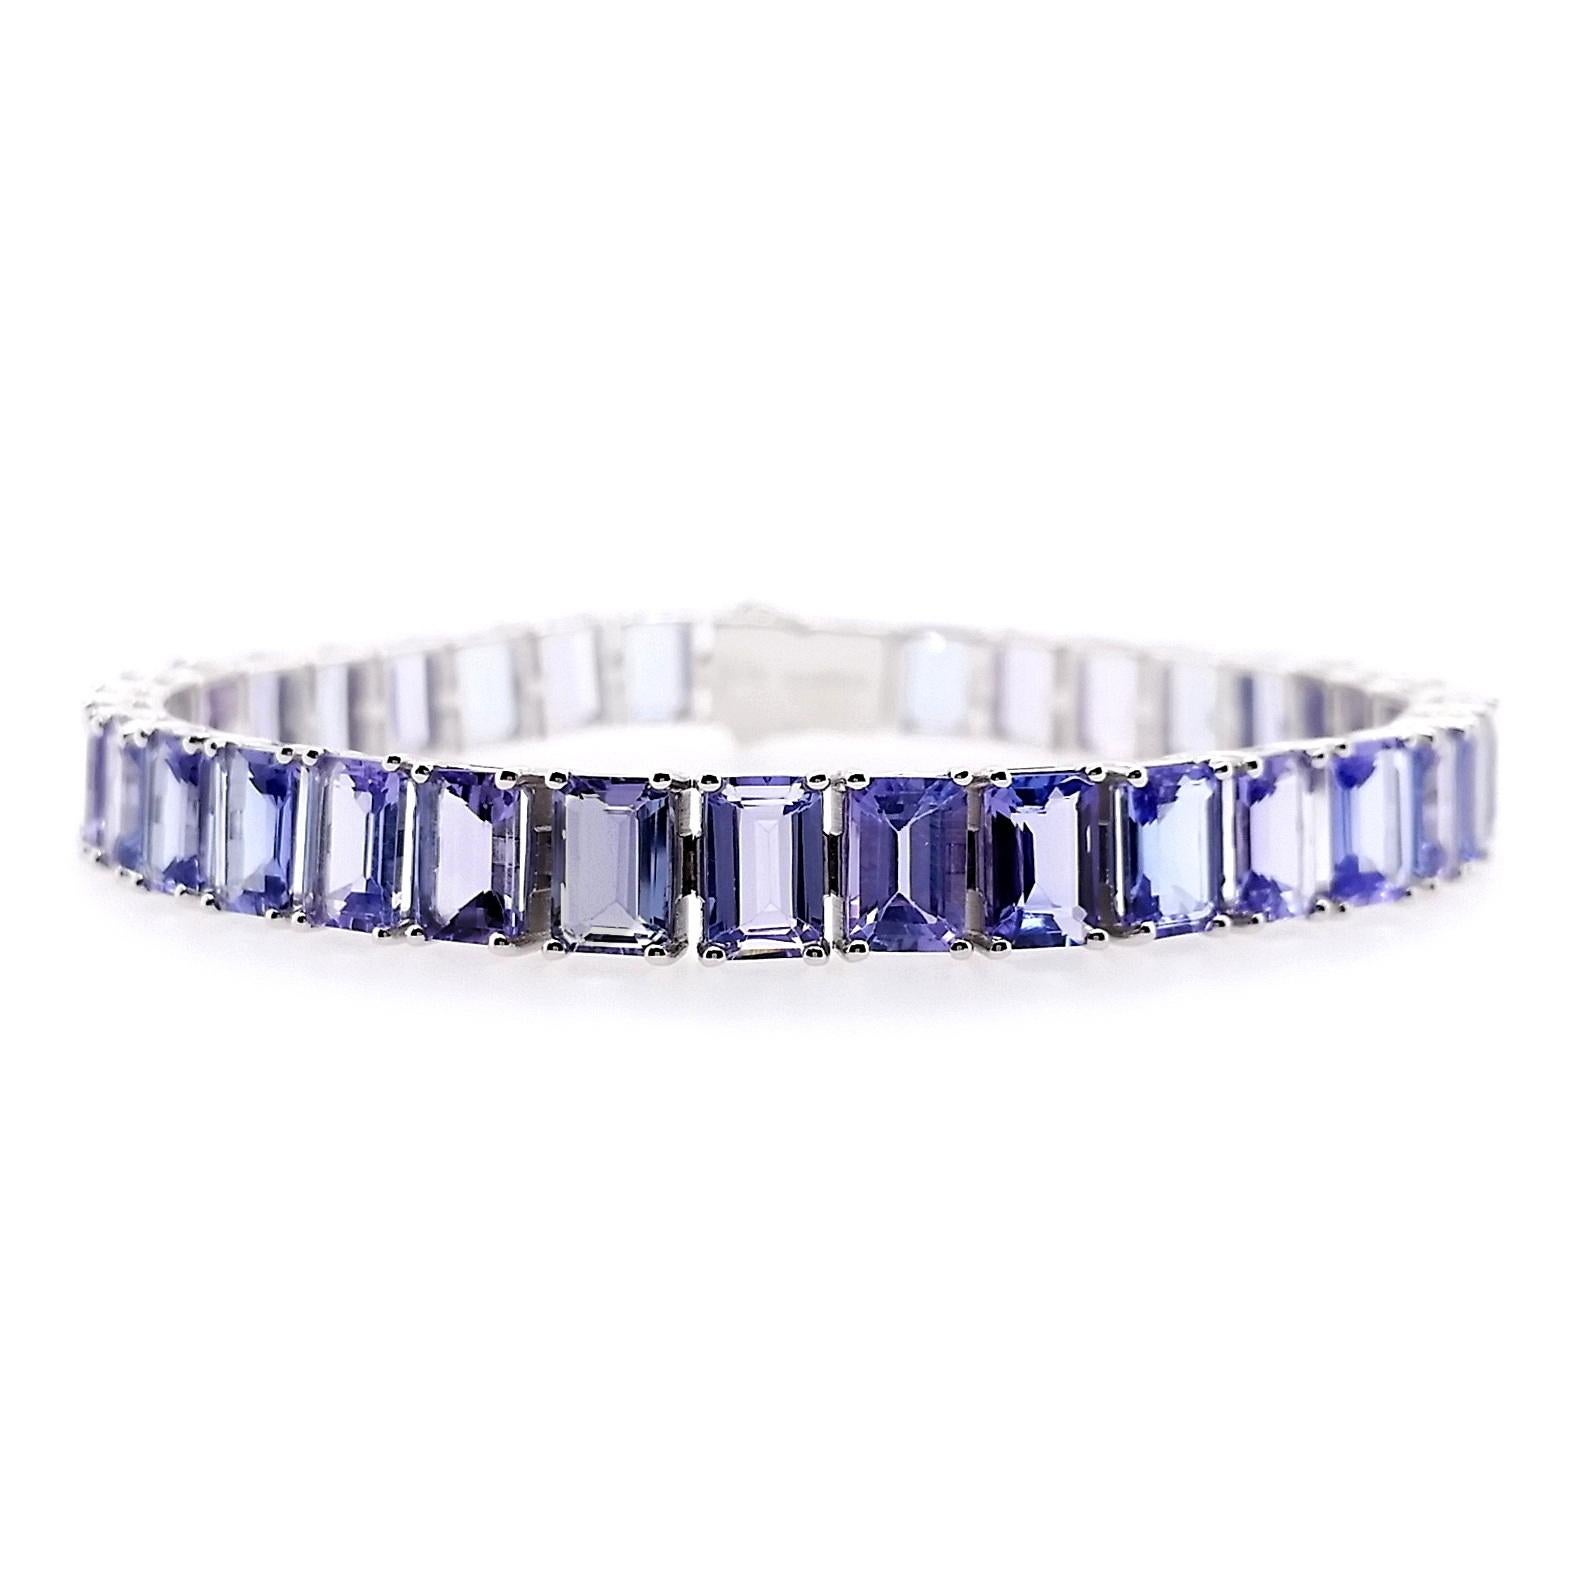 This dazzling 14K White Gold Bracelet from Top Crown Jewelry is a classic, alluring design set with a natural emerald-cut natural Tanzanites, to add the perfect glamour to any look.

This bracelet is certified by IGI laboratory, report number: